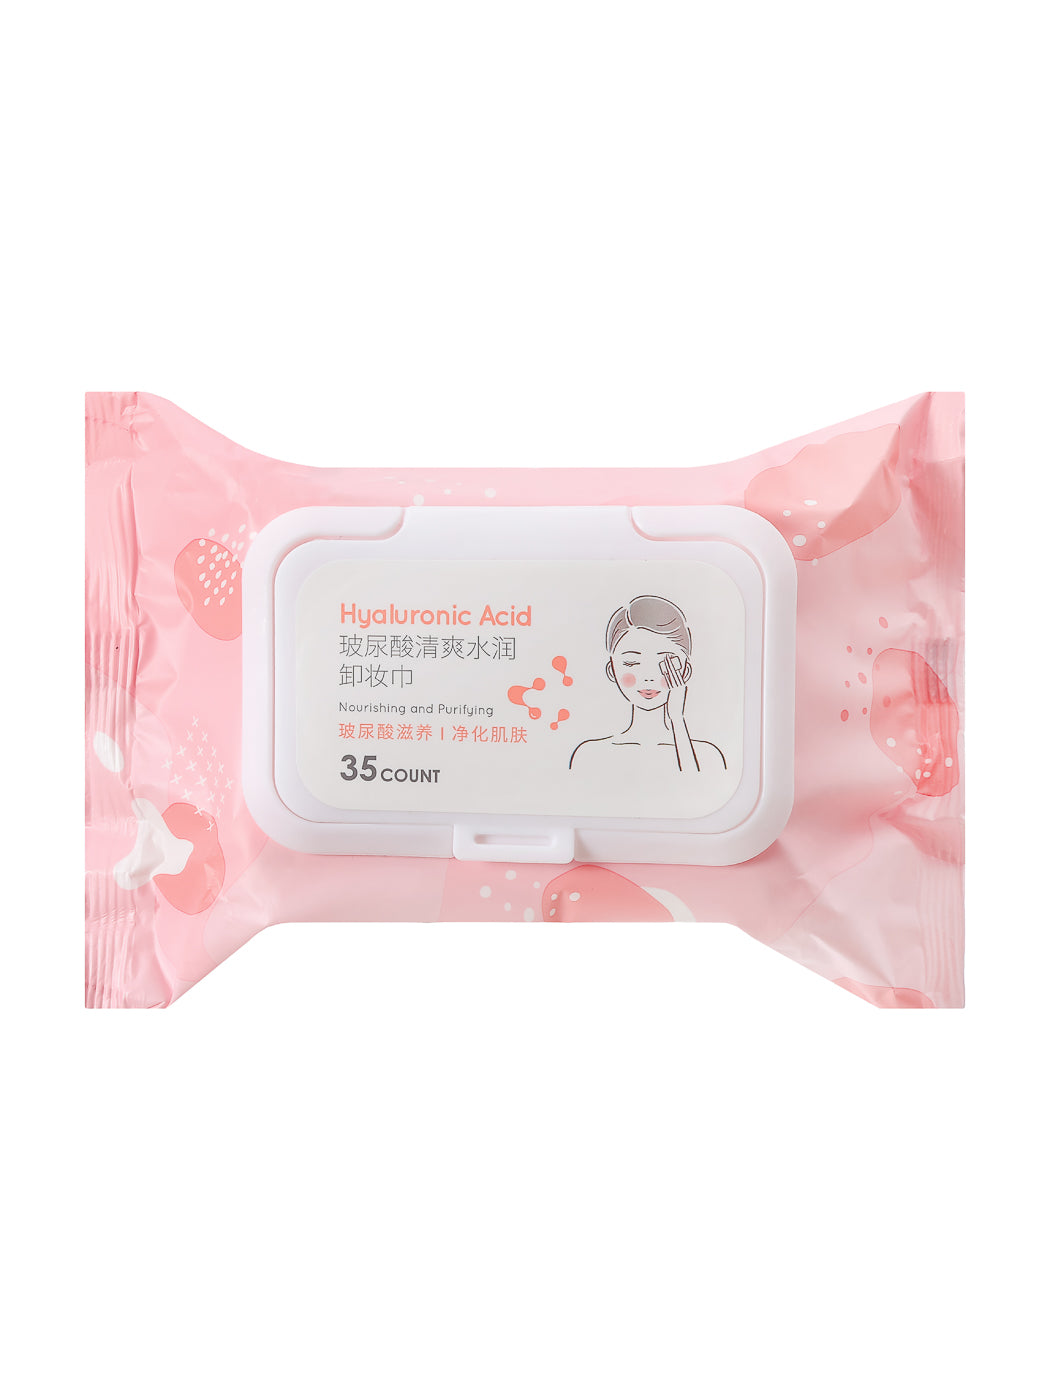 MINISO HYALURONIC ACID REFRESHING & MOISTURIZING MAKEUP REMOVAL WIPES (35 WIPES) 2008470210101 MAKEUP REMOVER